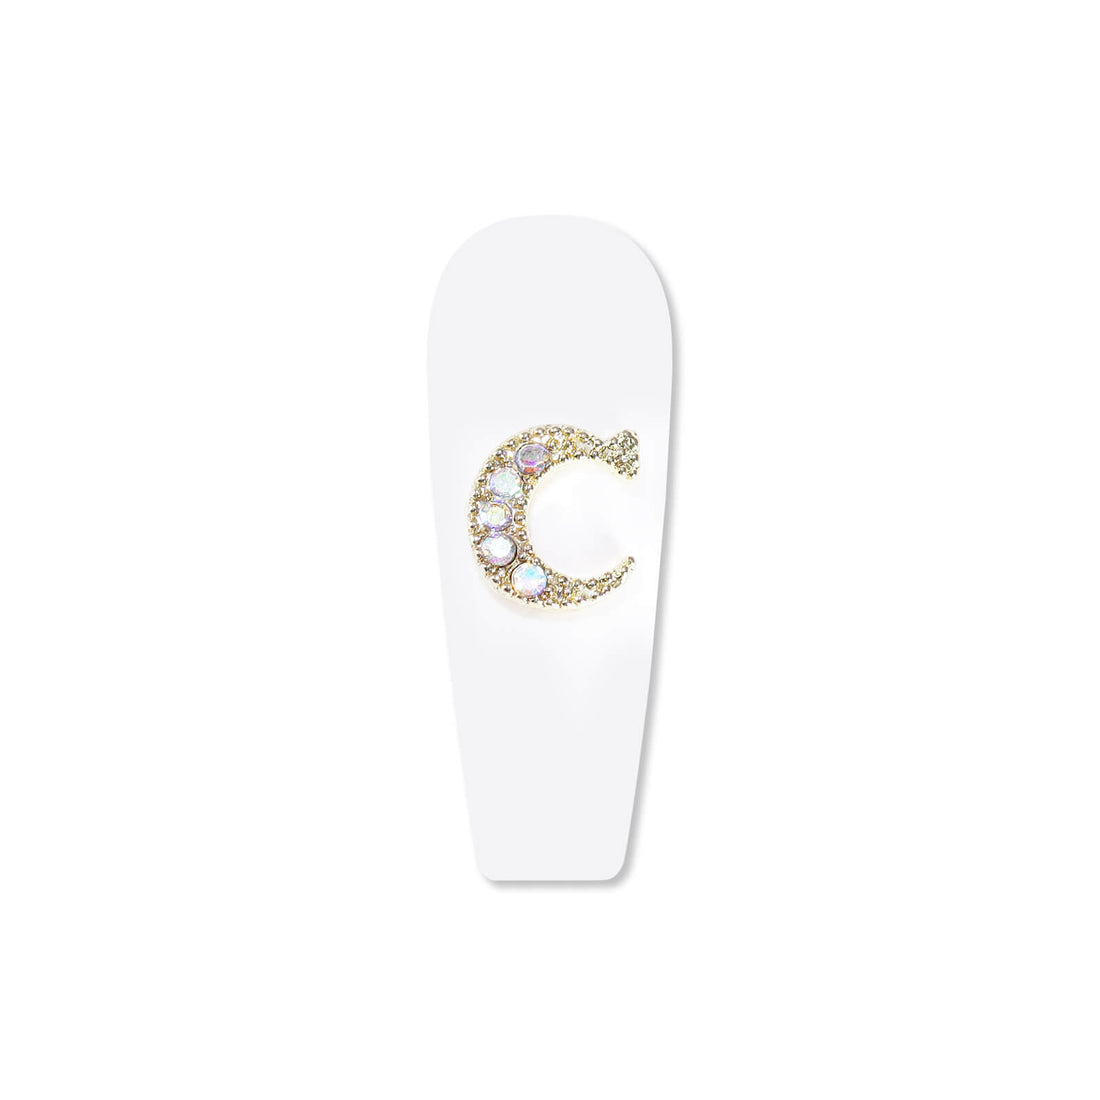 C Style #2 Gold Zircon 3D Nail Charms (5 Pieces) – The Additude Shop